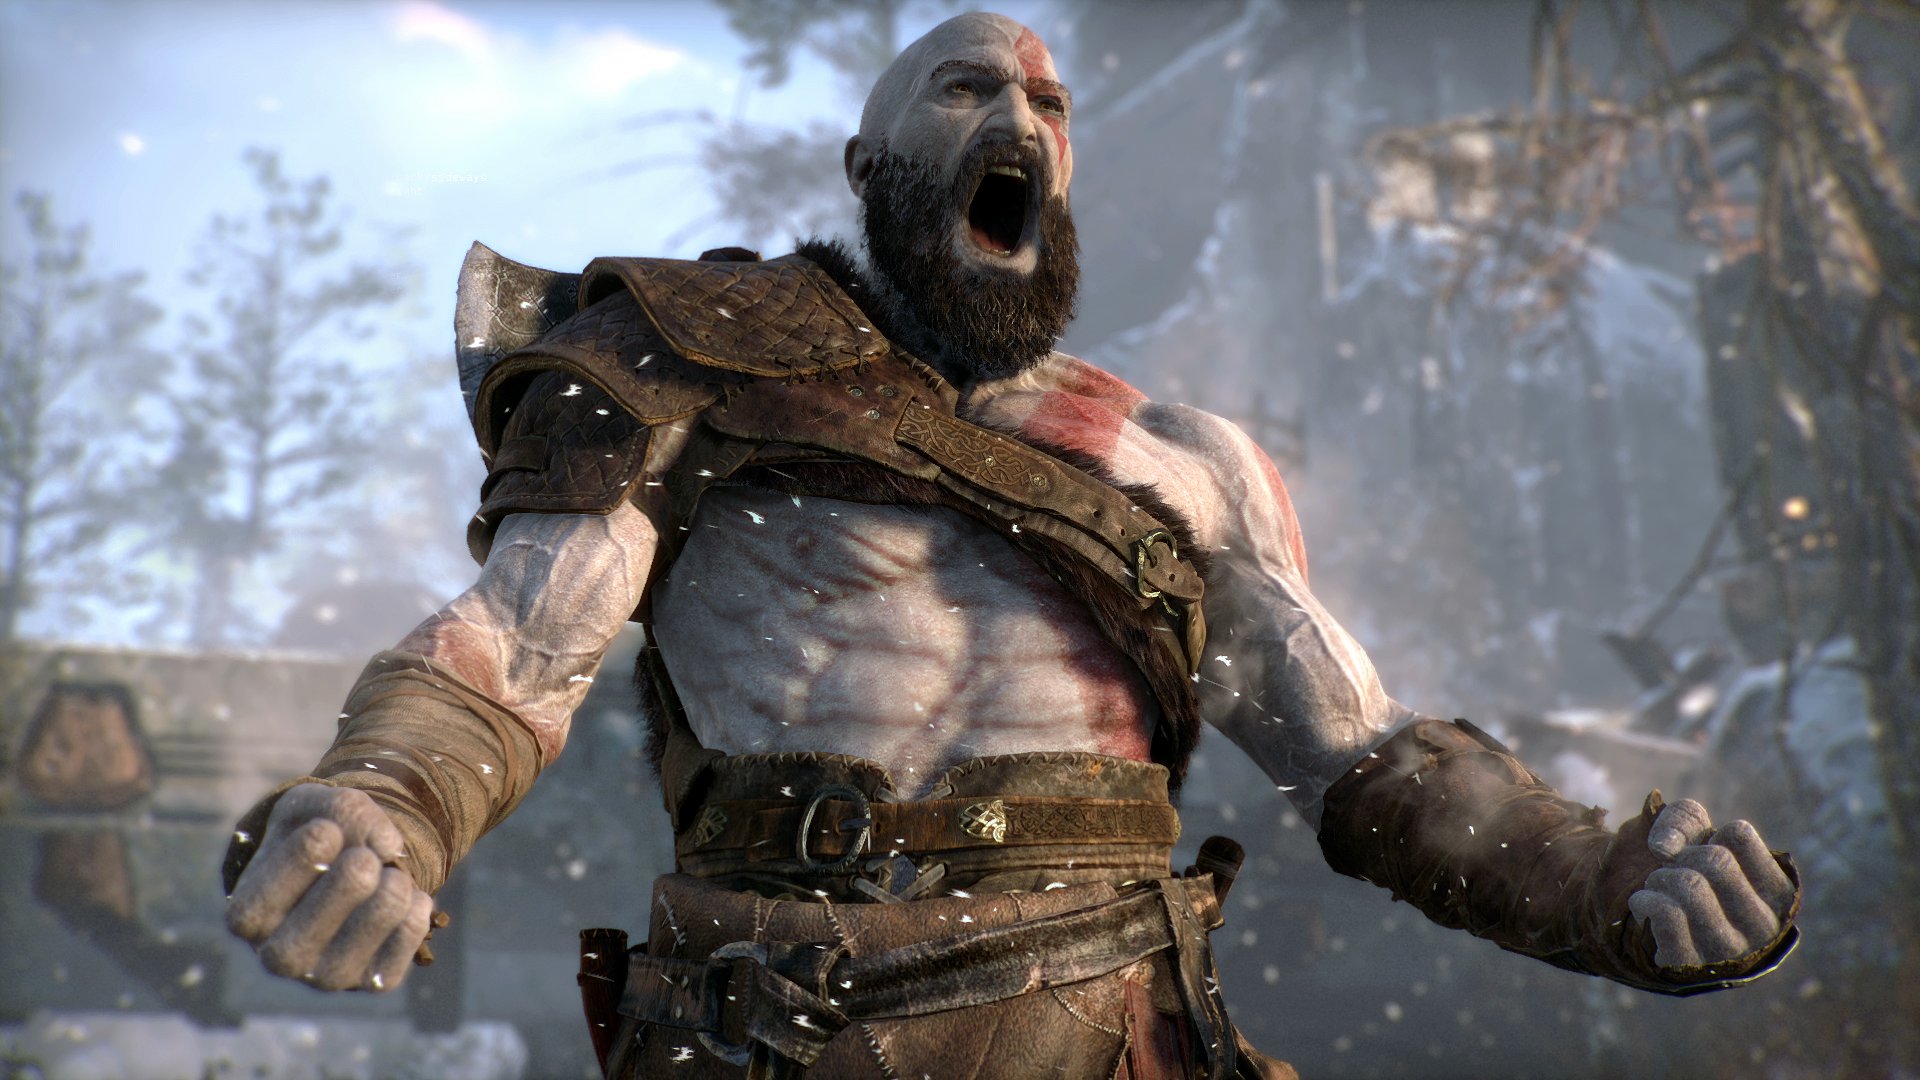 Everything we know about the new God of War - launch, gameplay and platforms